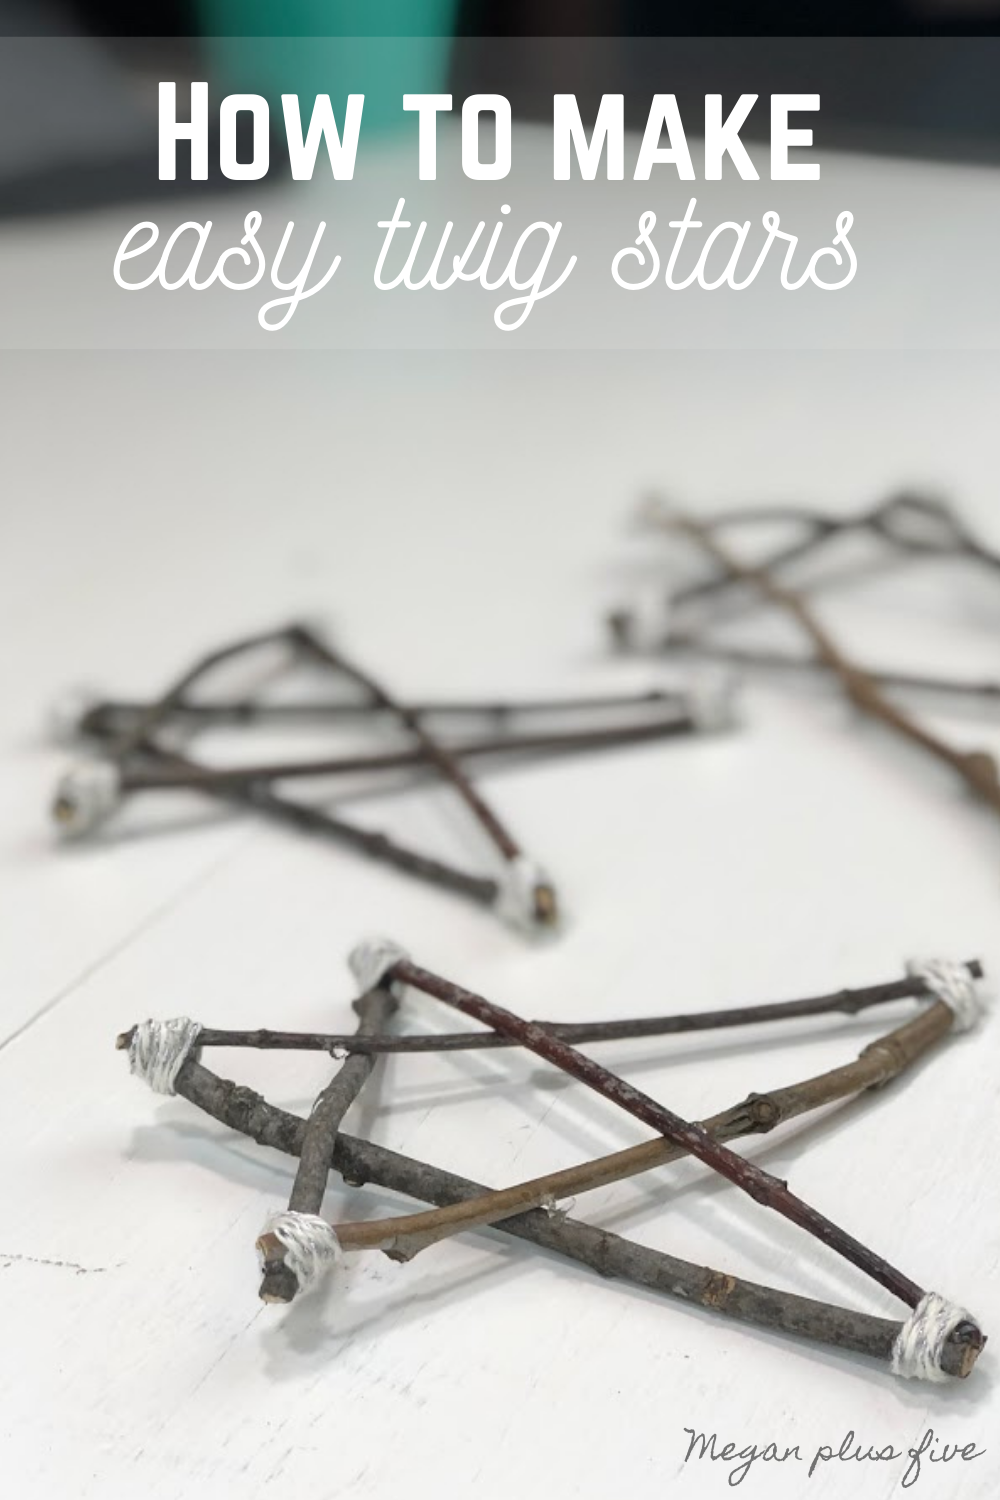 How to make stars from twigs for Christmas. Make cheap and frugal Christmas decor using sticks from your yard. Twine/jute twig stars easy craft tutorial for simple rustic looking farmhouse home decor.